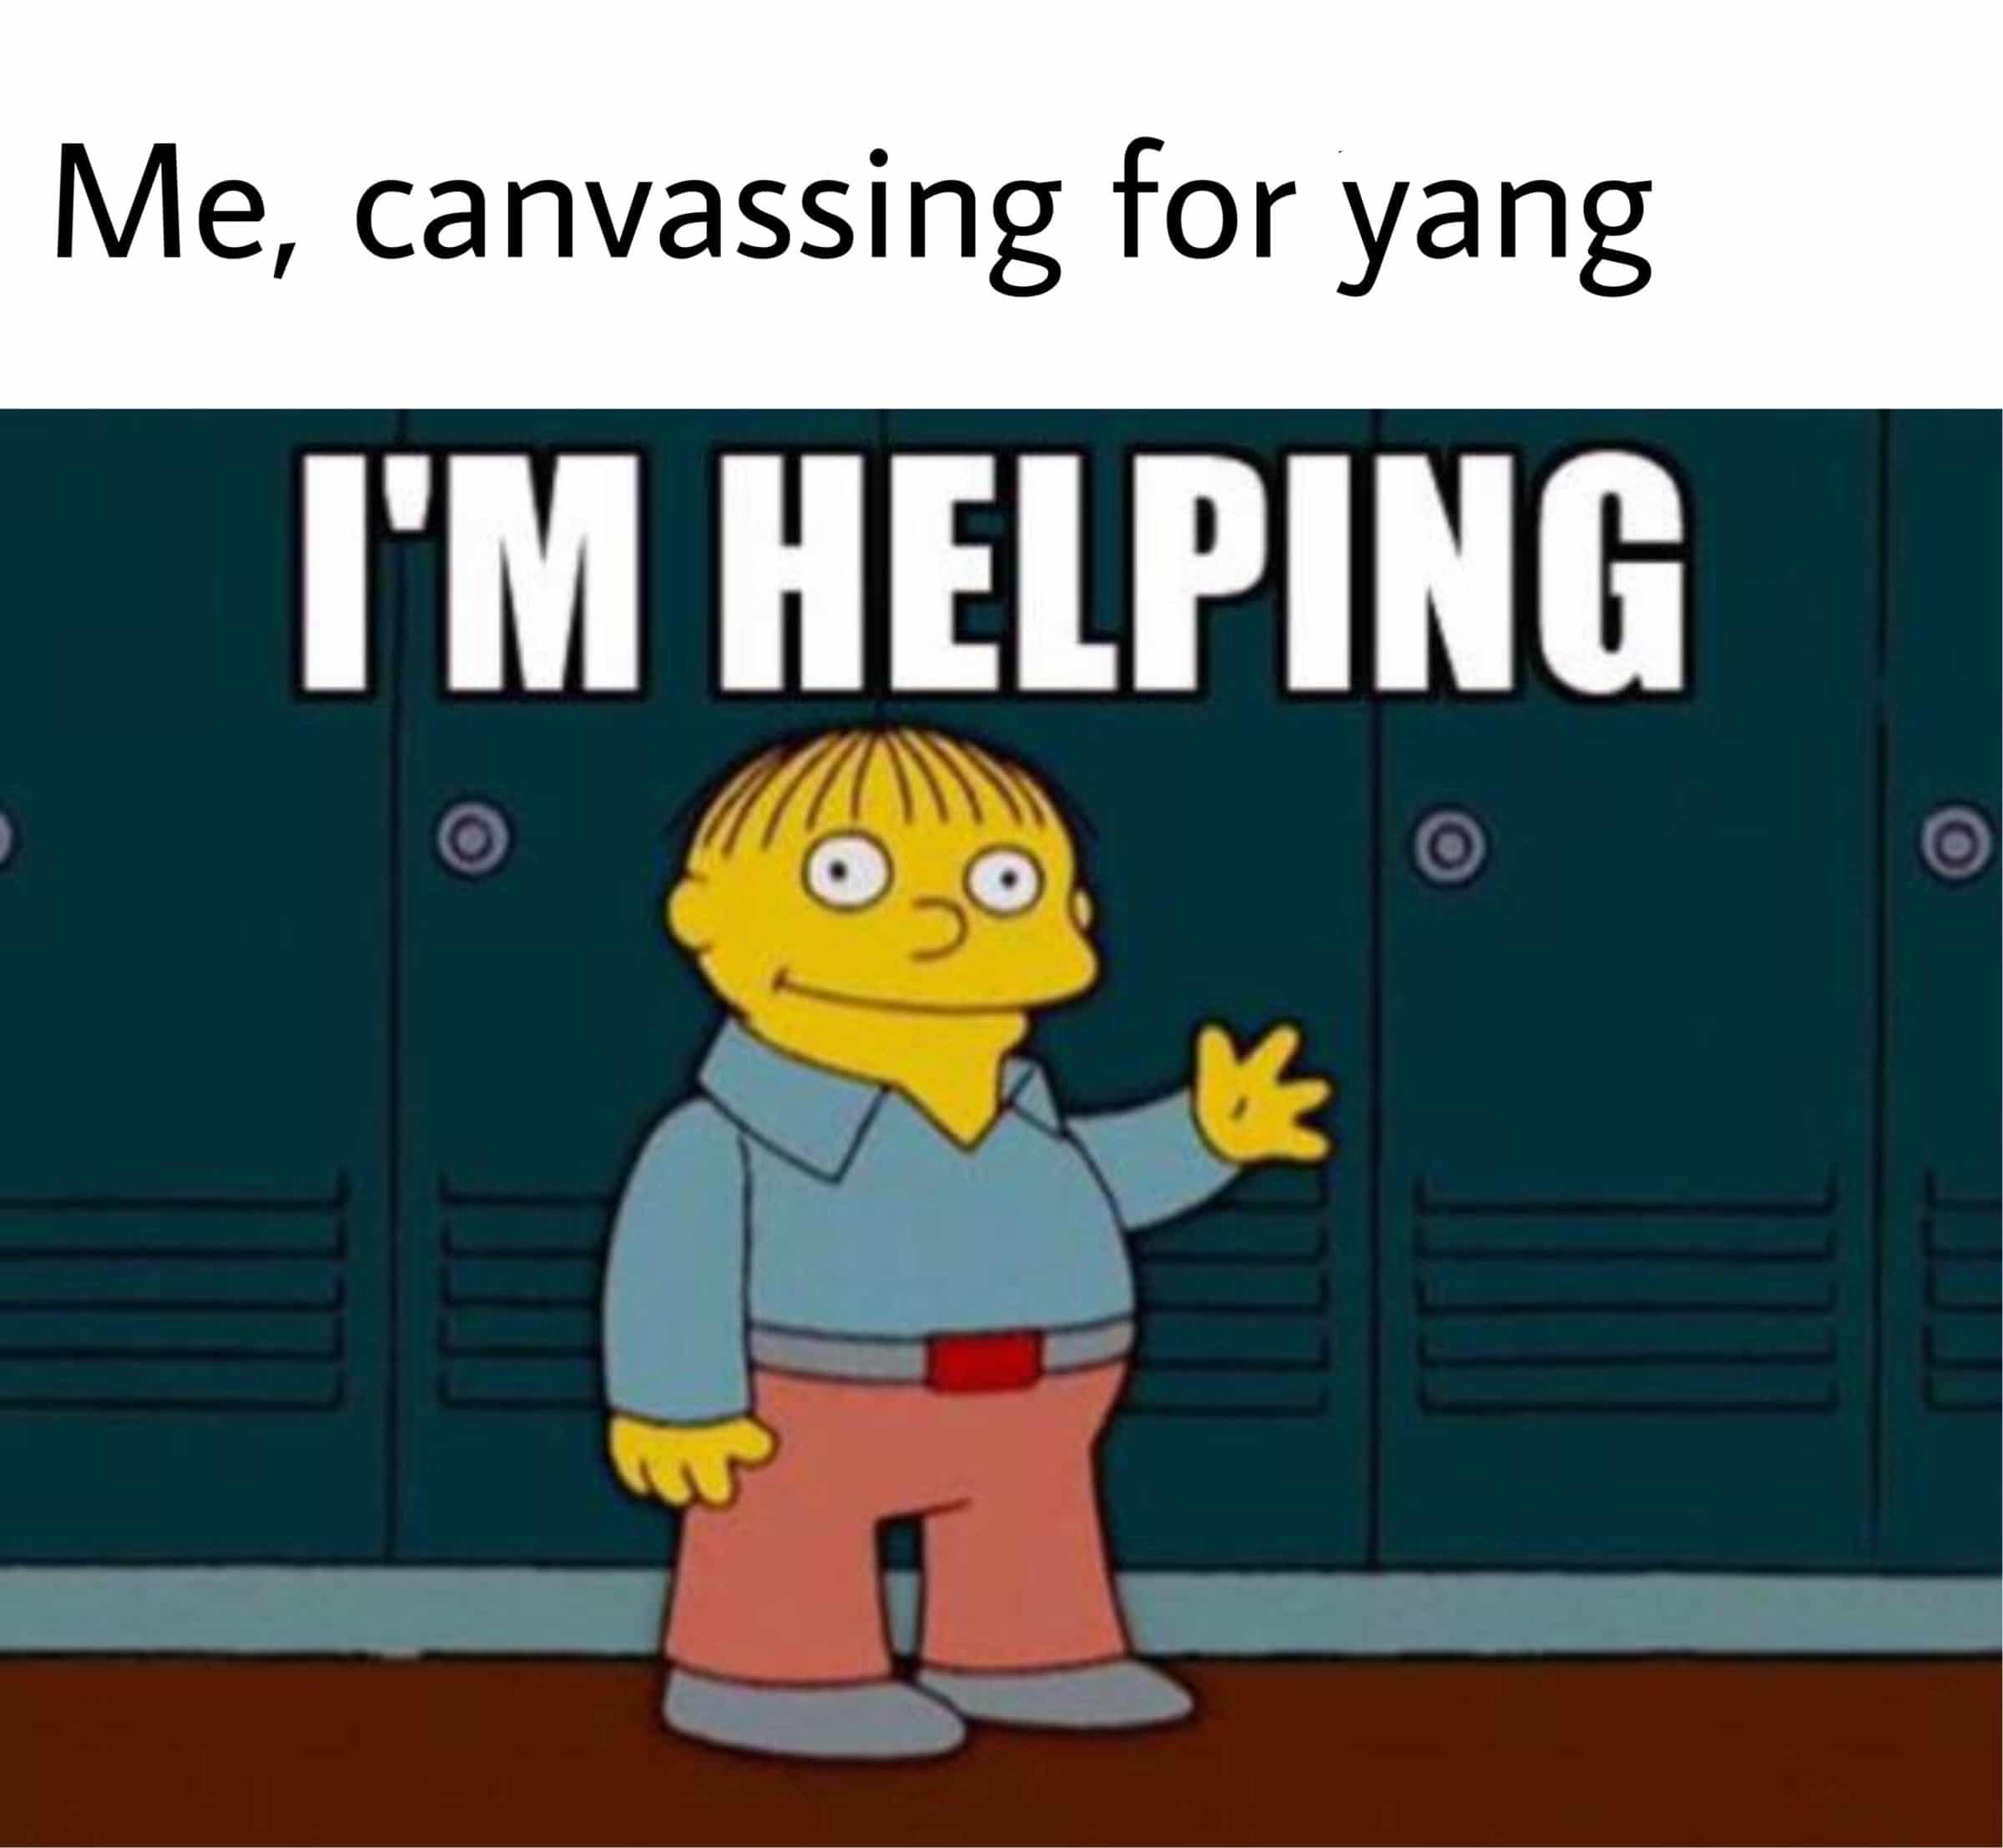 humanity-first yang-memes humanity-first text: Me, canvassing for yang I'M HELPING 